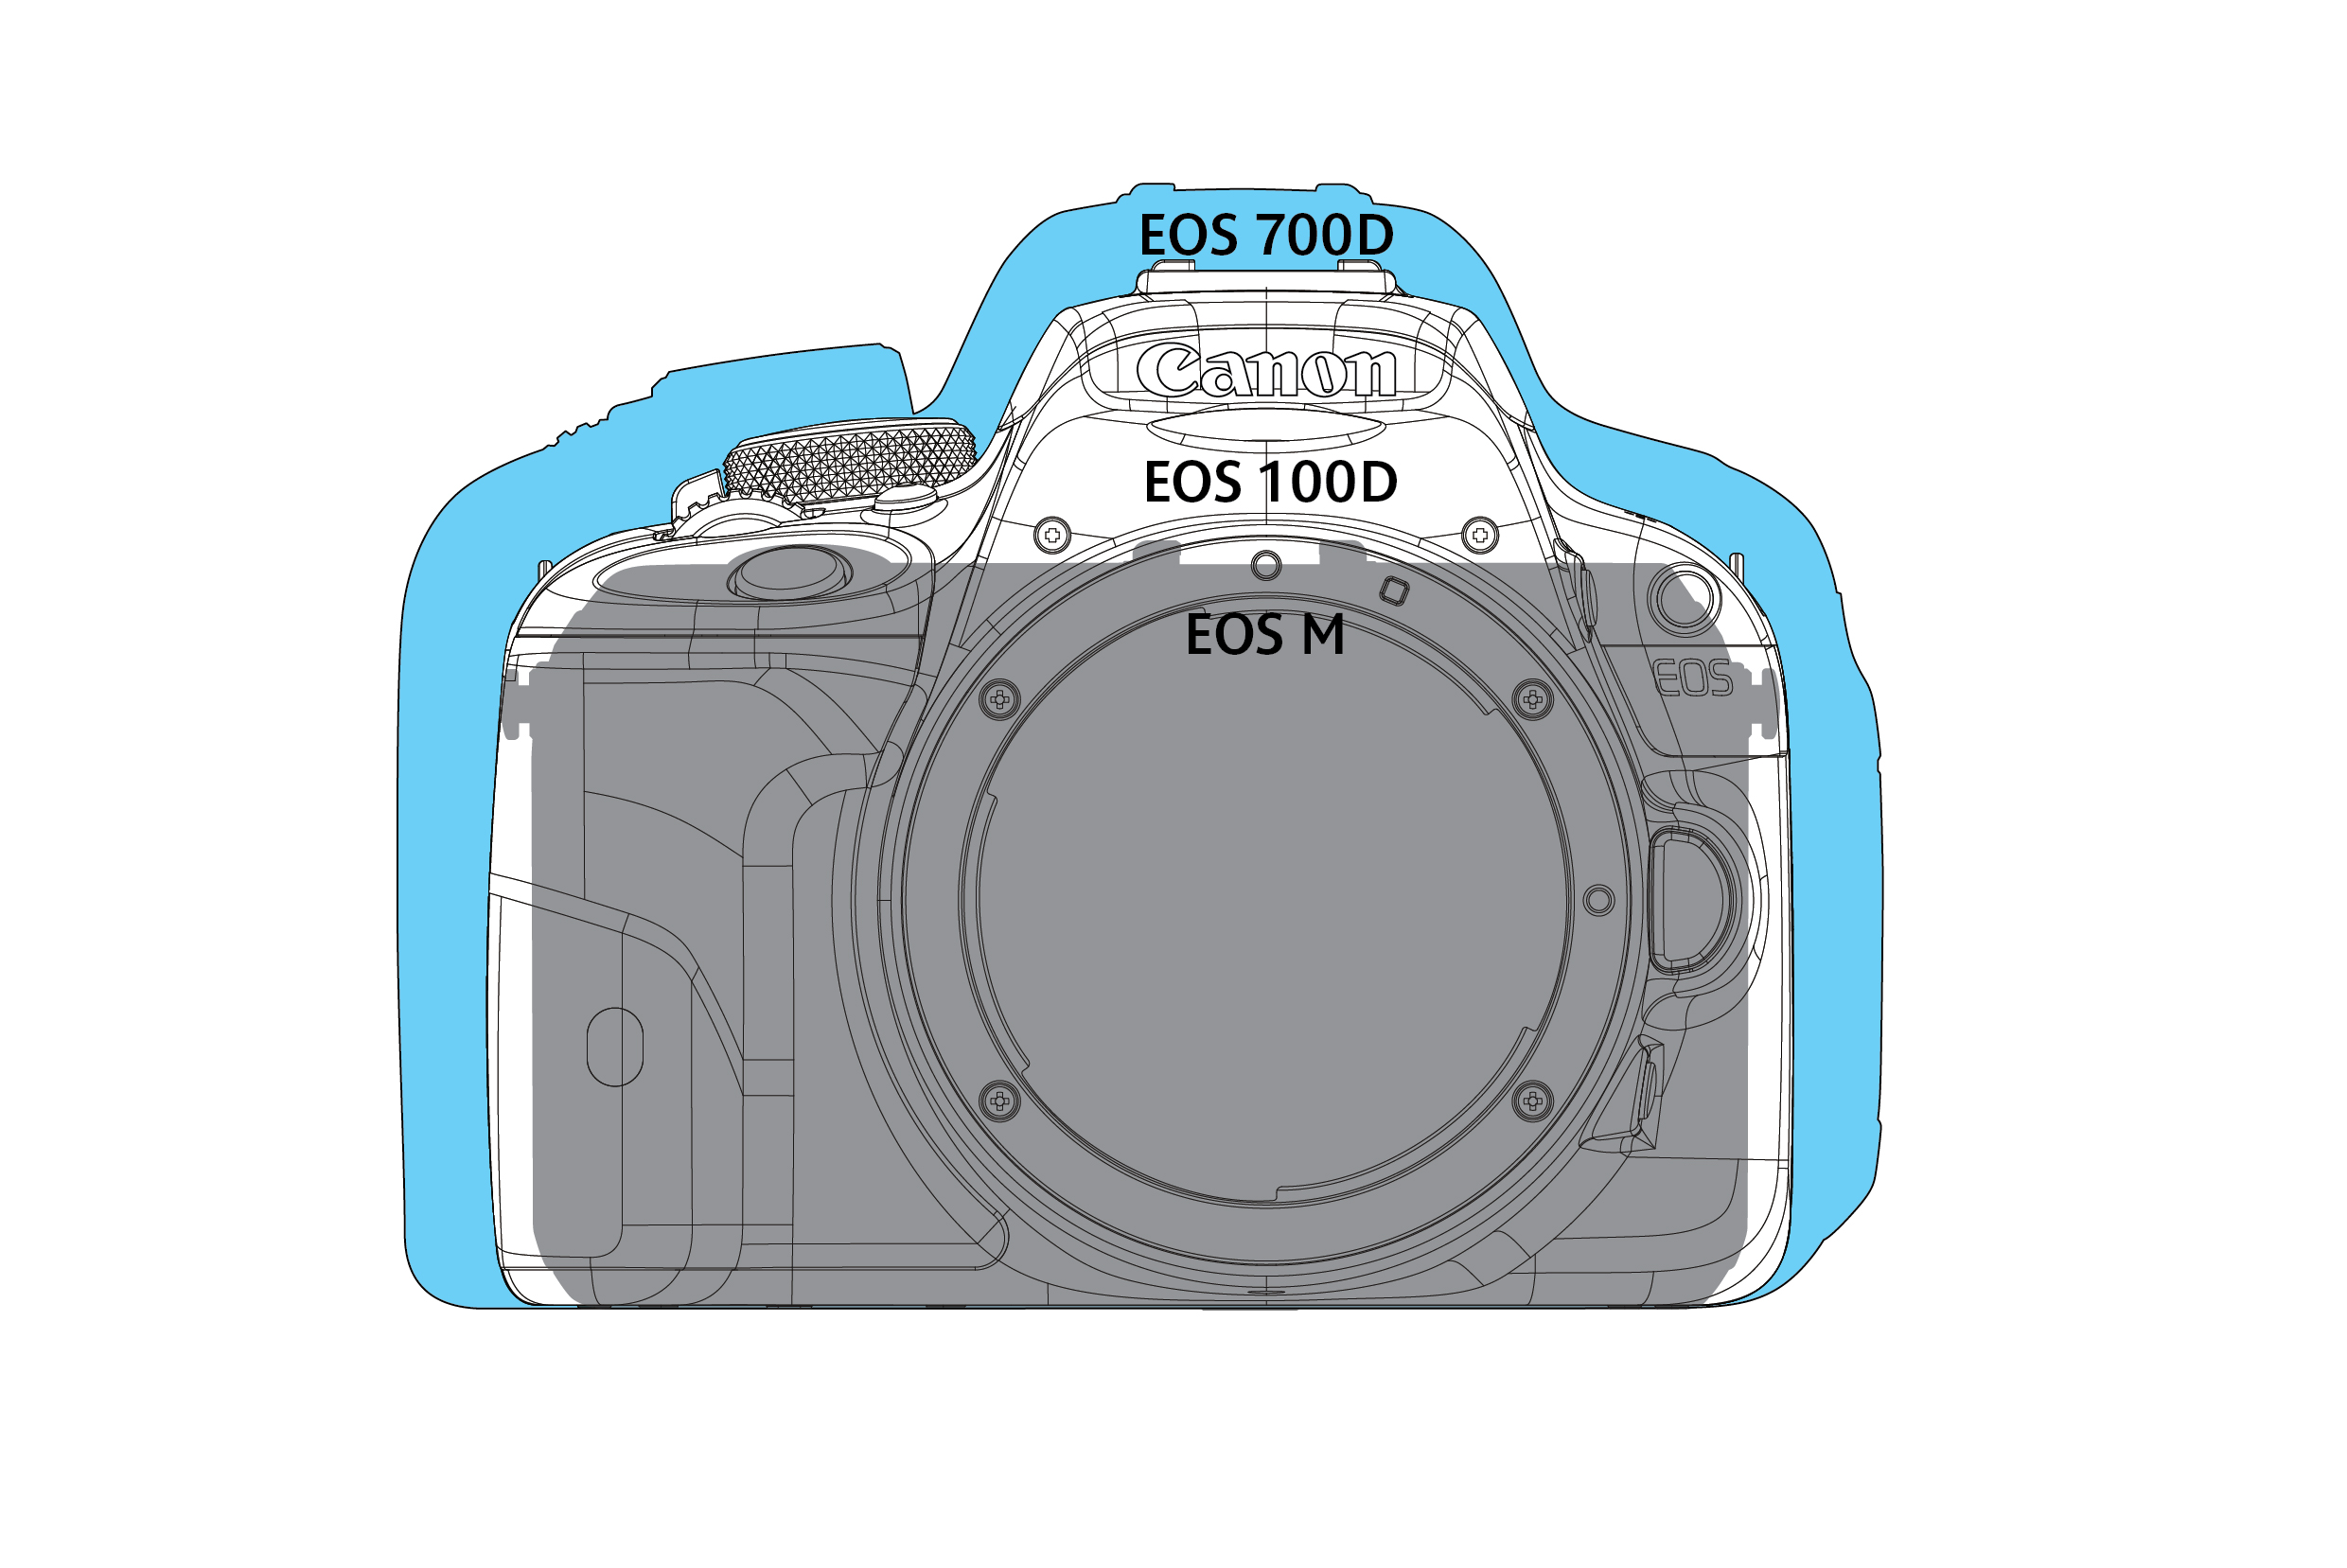 EOS-100D-Comparison-of-external-dimensions-with-EOS-M-and-EOS-700D-01.jpg